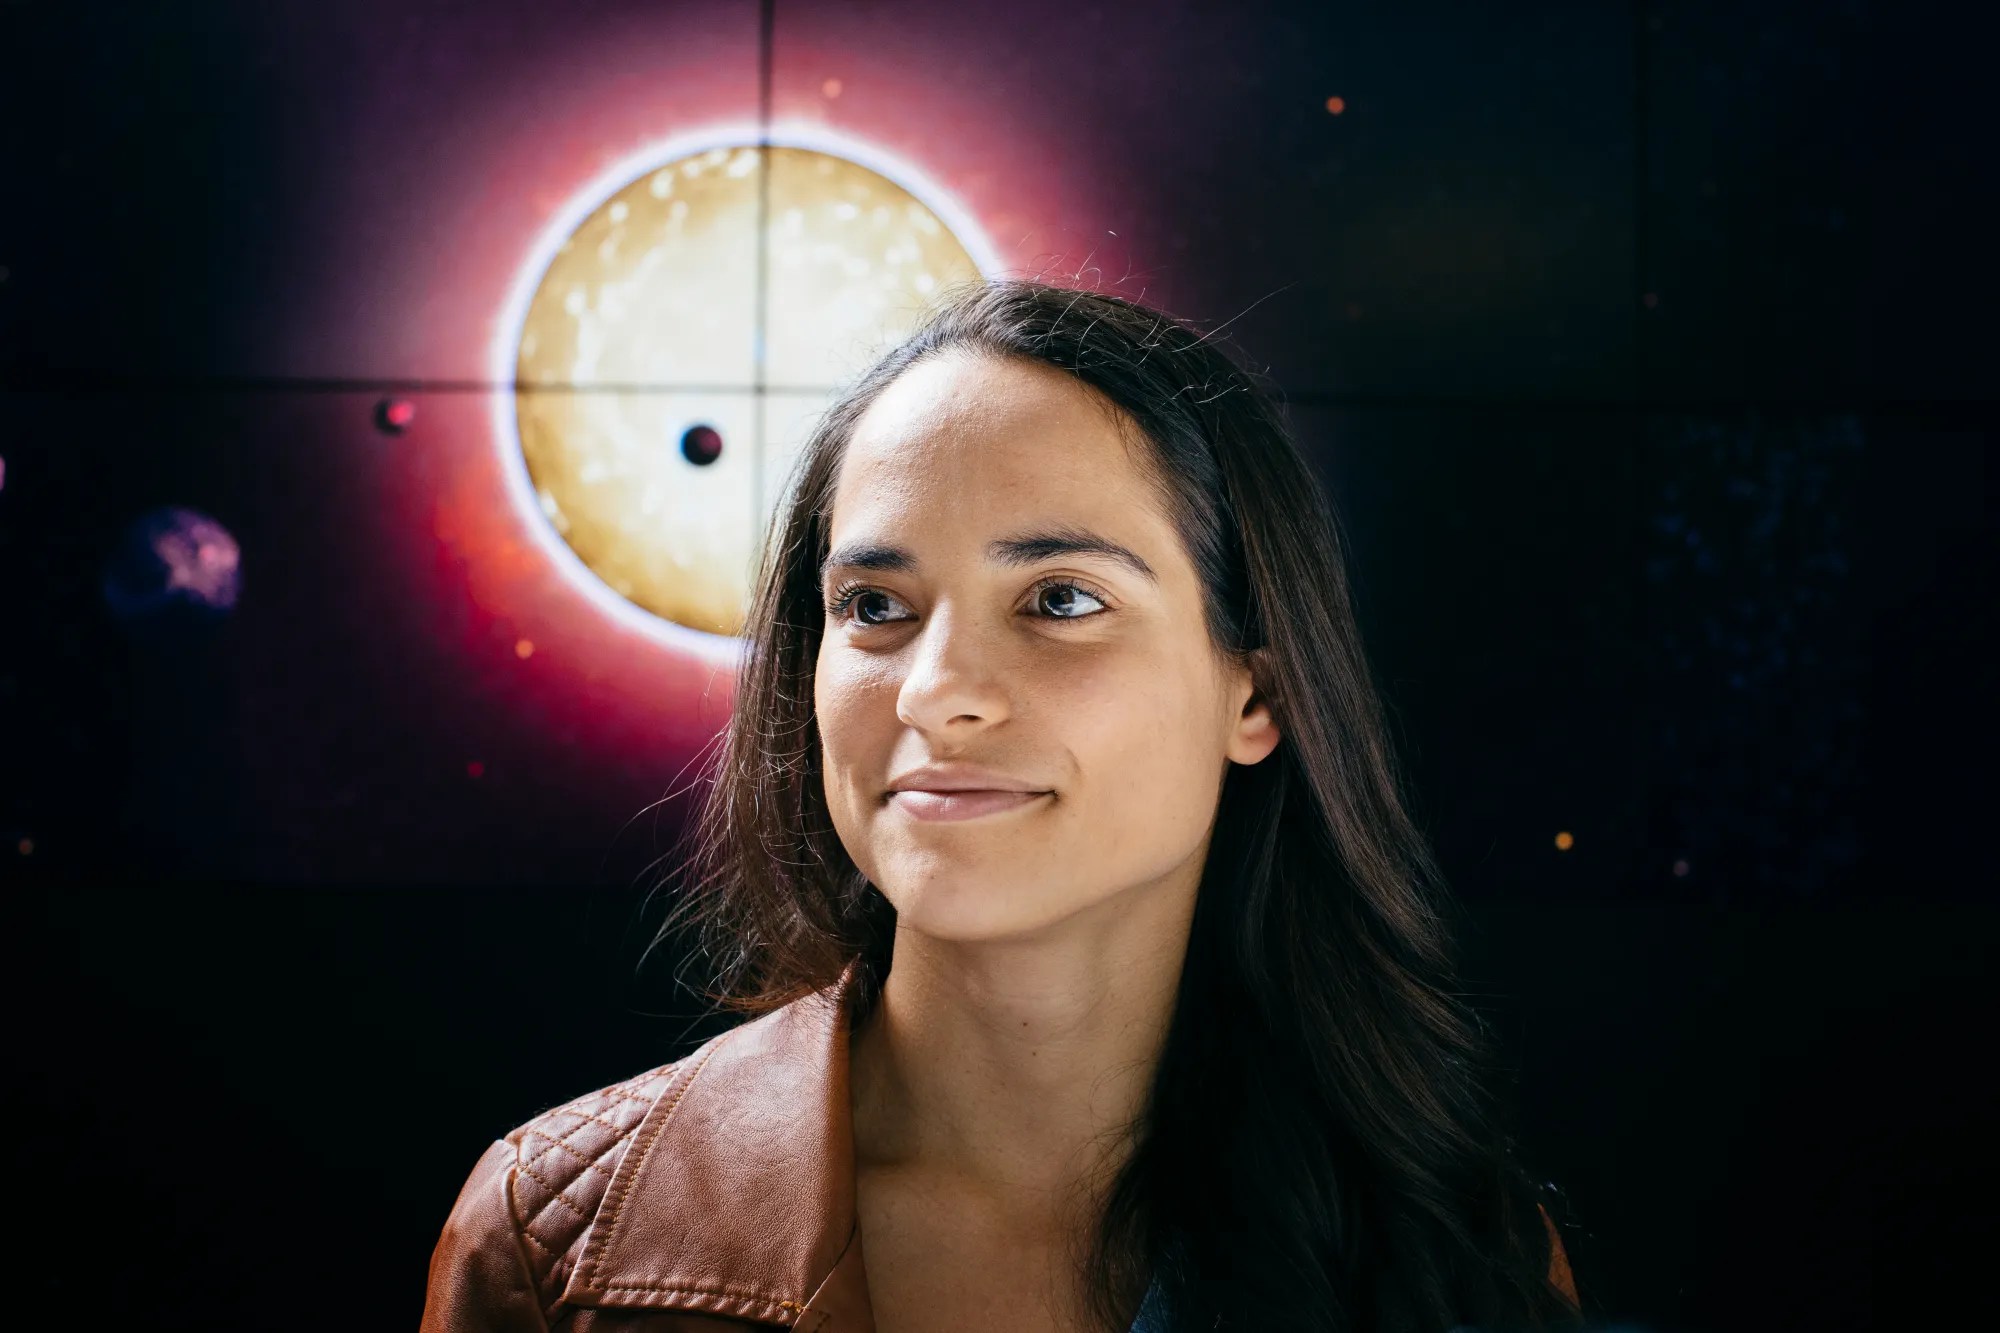 Dr. Natasha Batalha, an astronomer at NASA’s Ames Research Center in California’s Silicon Valley, says collaborating with her teams is one of the best parts of her job.